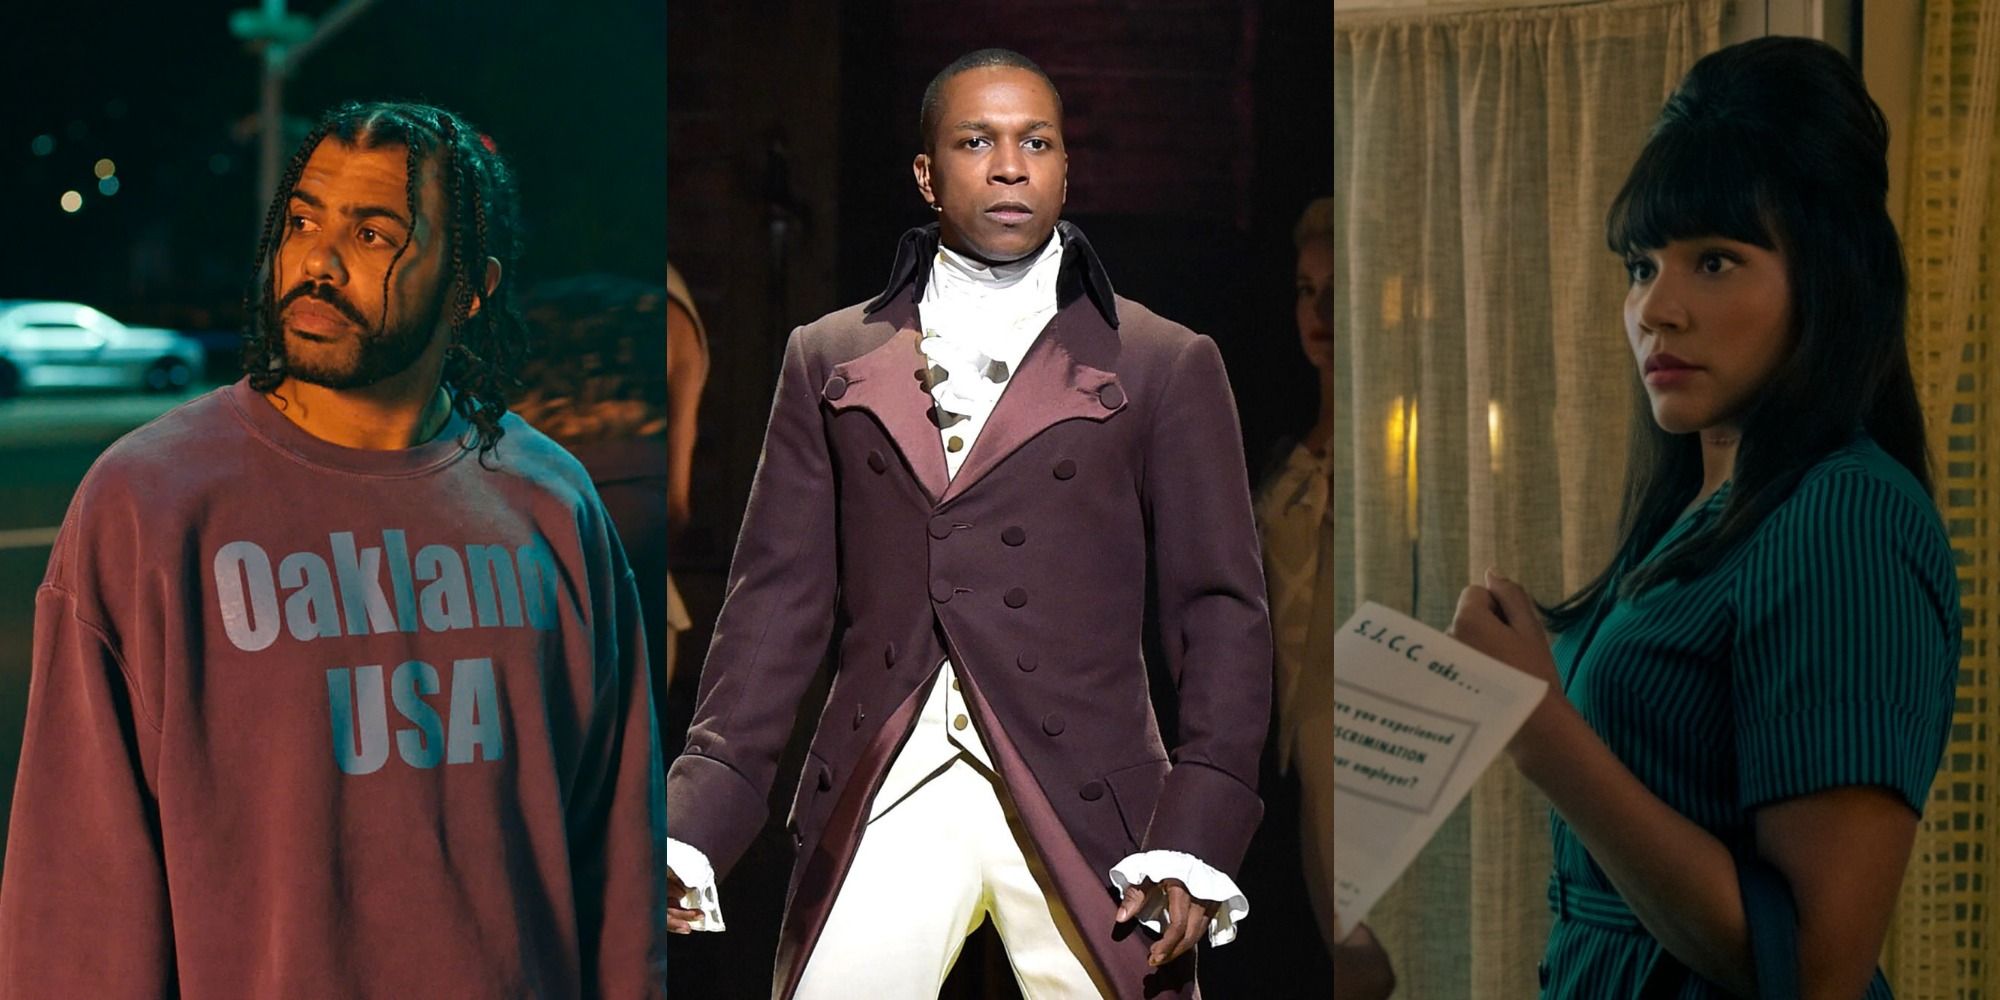 Split image of Daveed Diggs in Blindspotting, Leslie Odom Jr. in Hamilton, and Emmy Raver-Lampman in Umbrella Academy